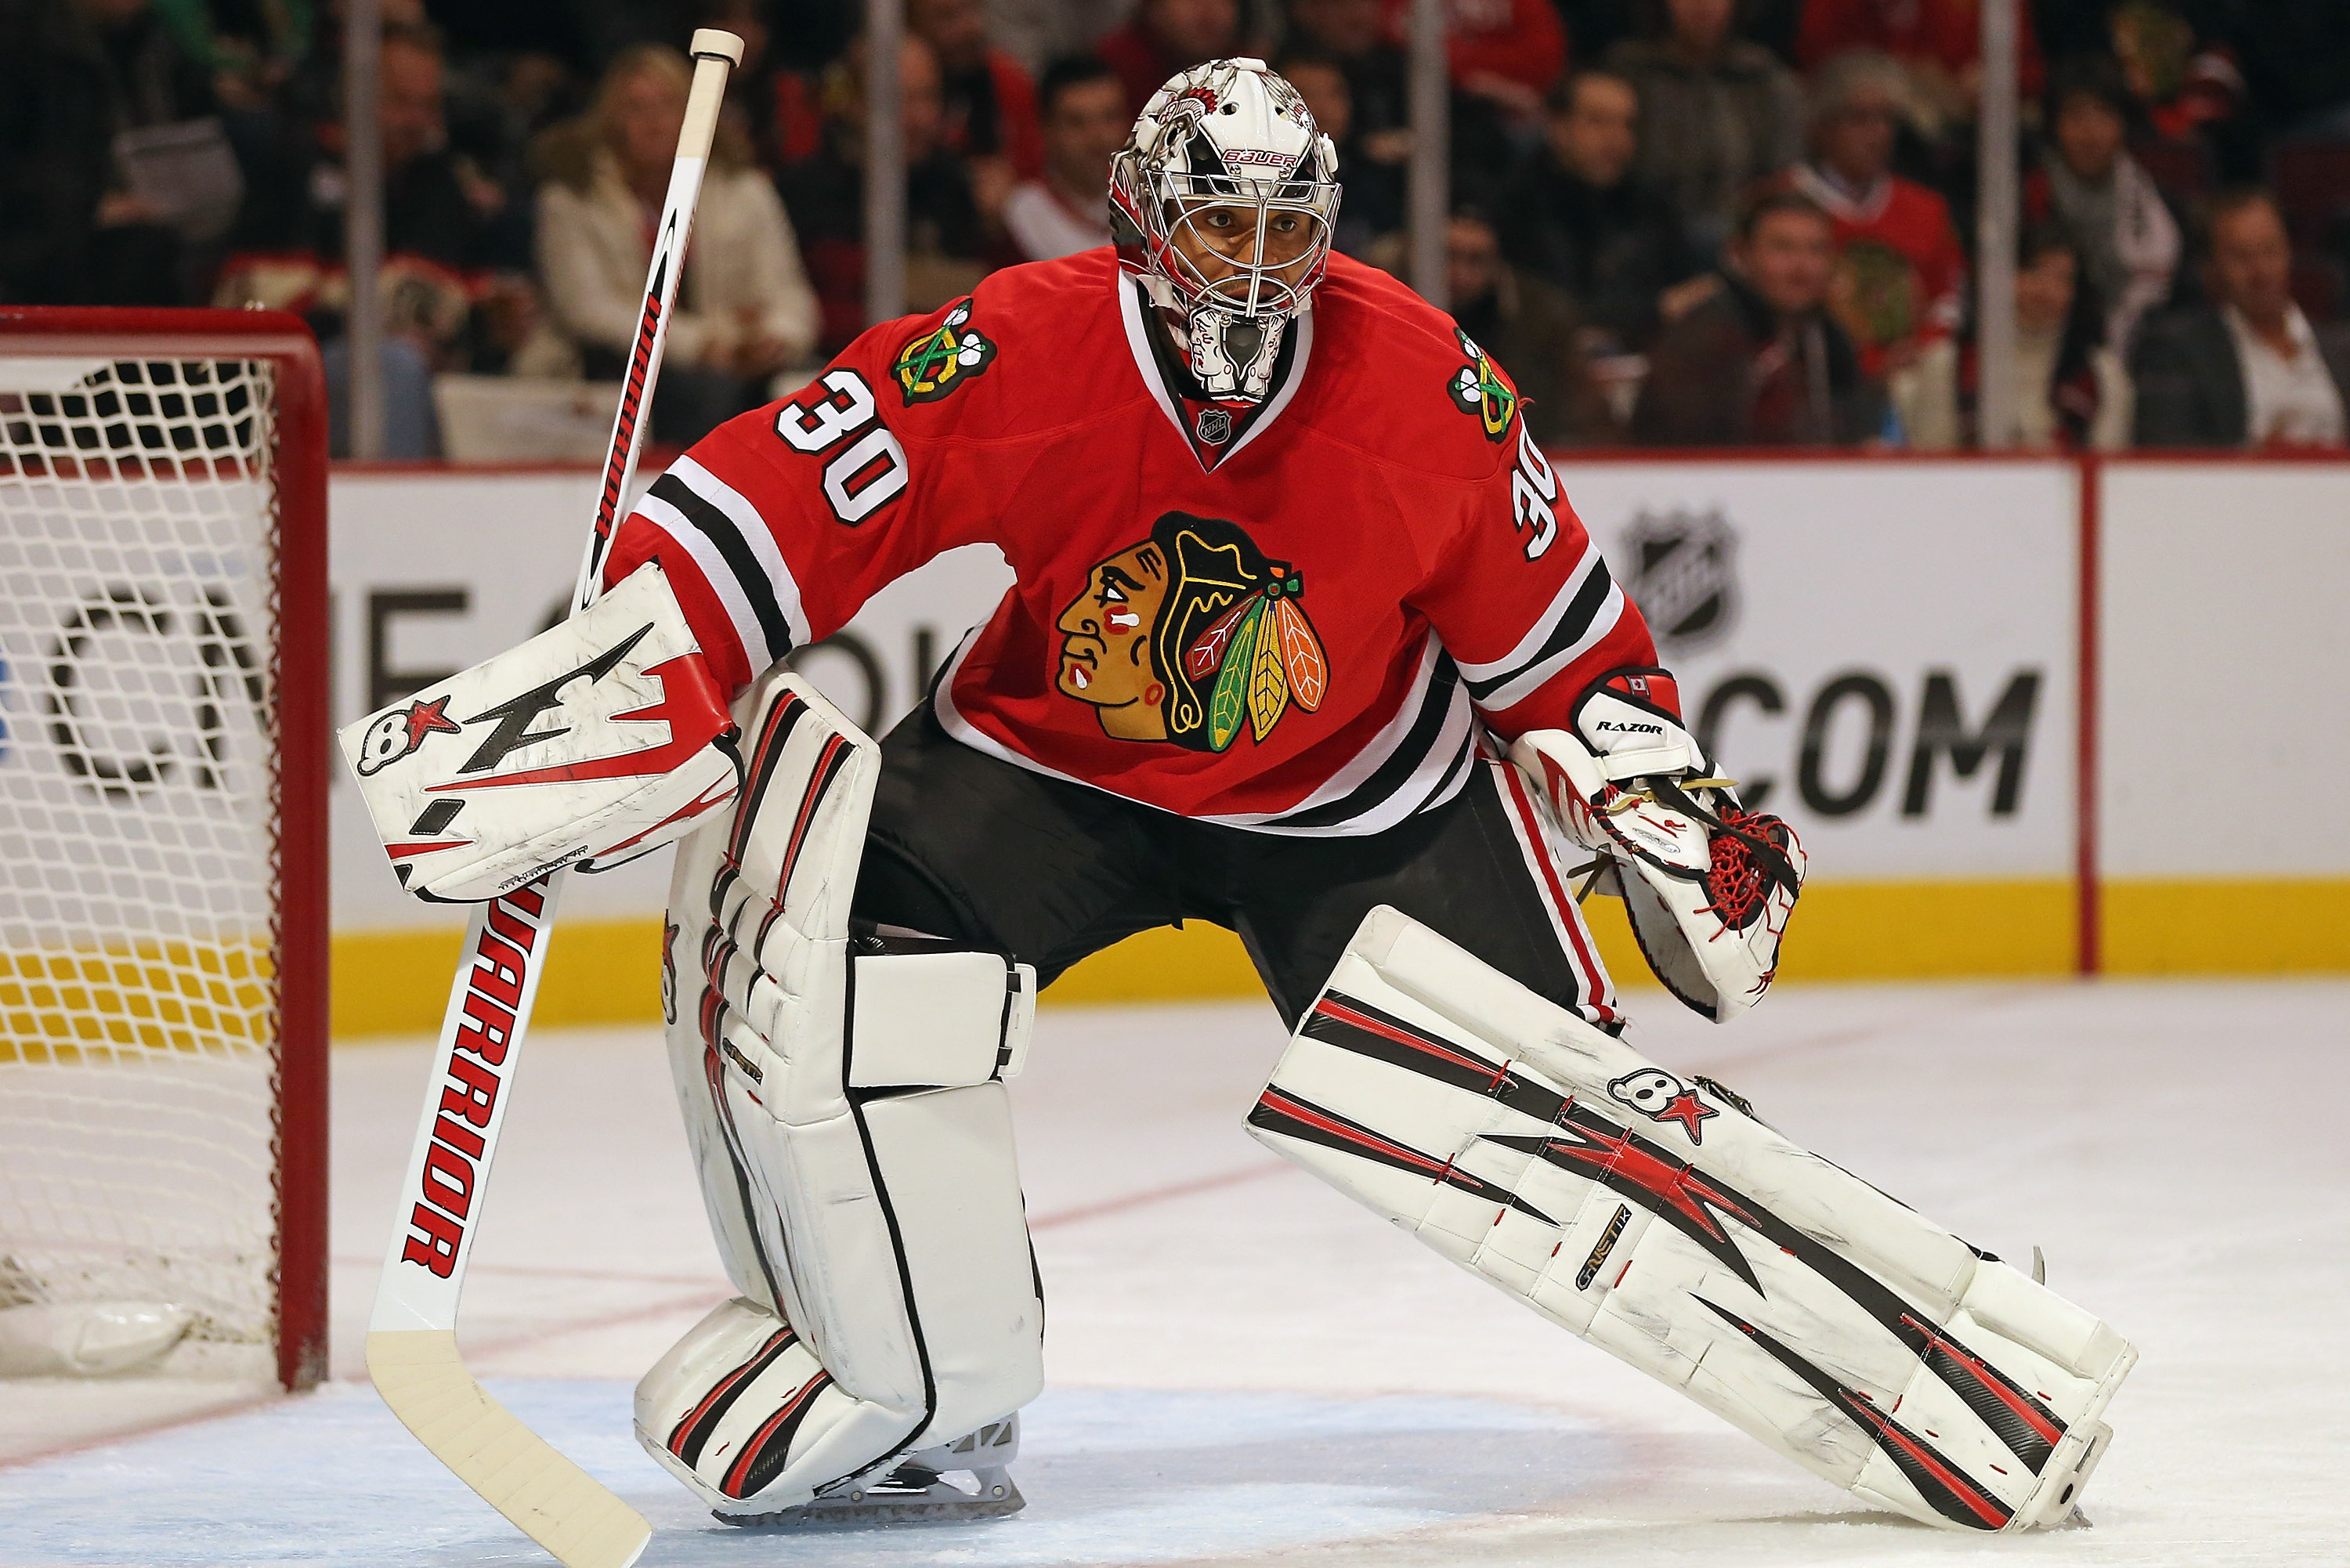 Ray Emery, 35, NHL goalie known for aggressive style - The Boston